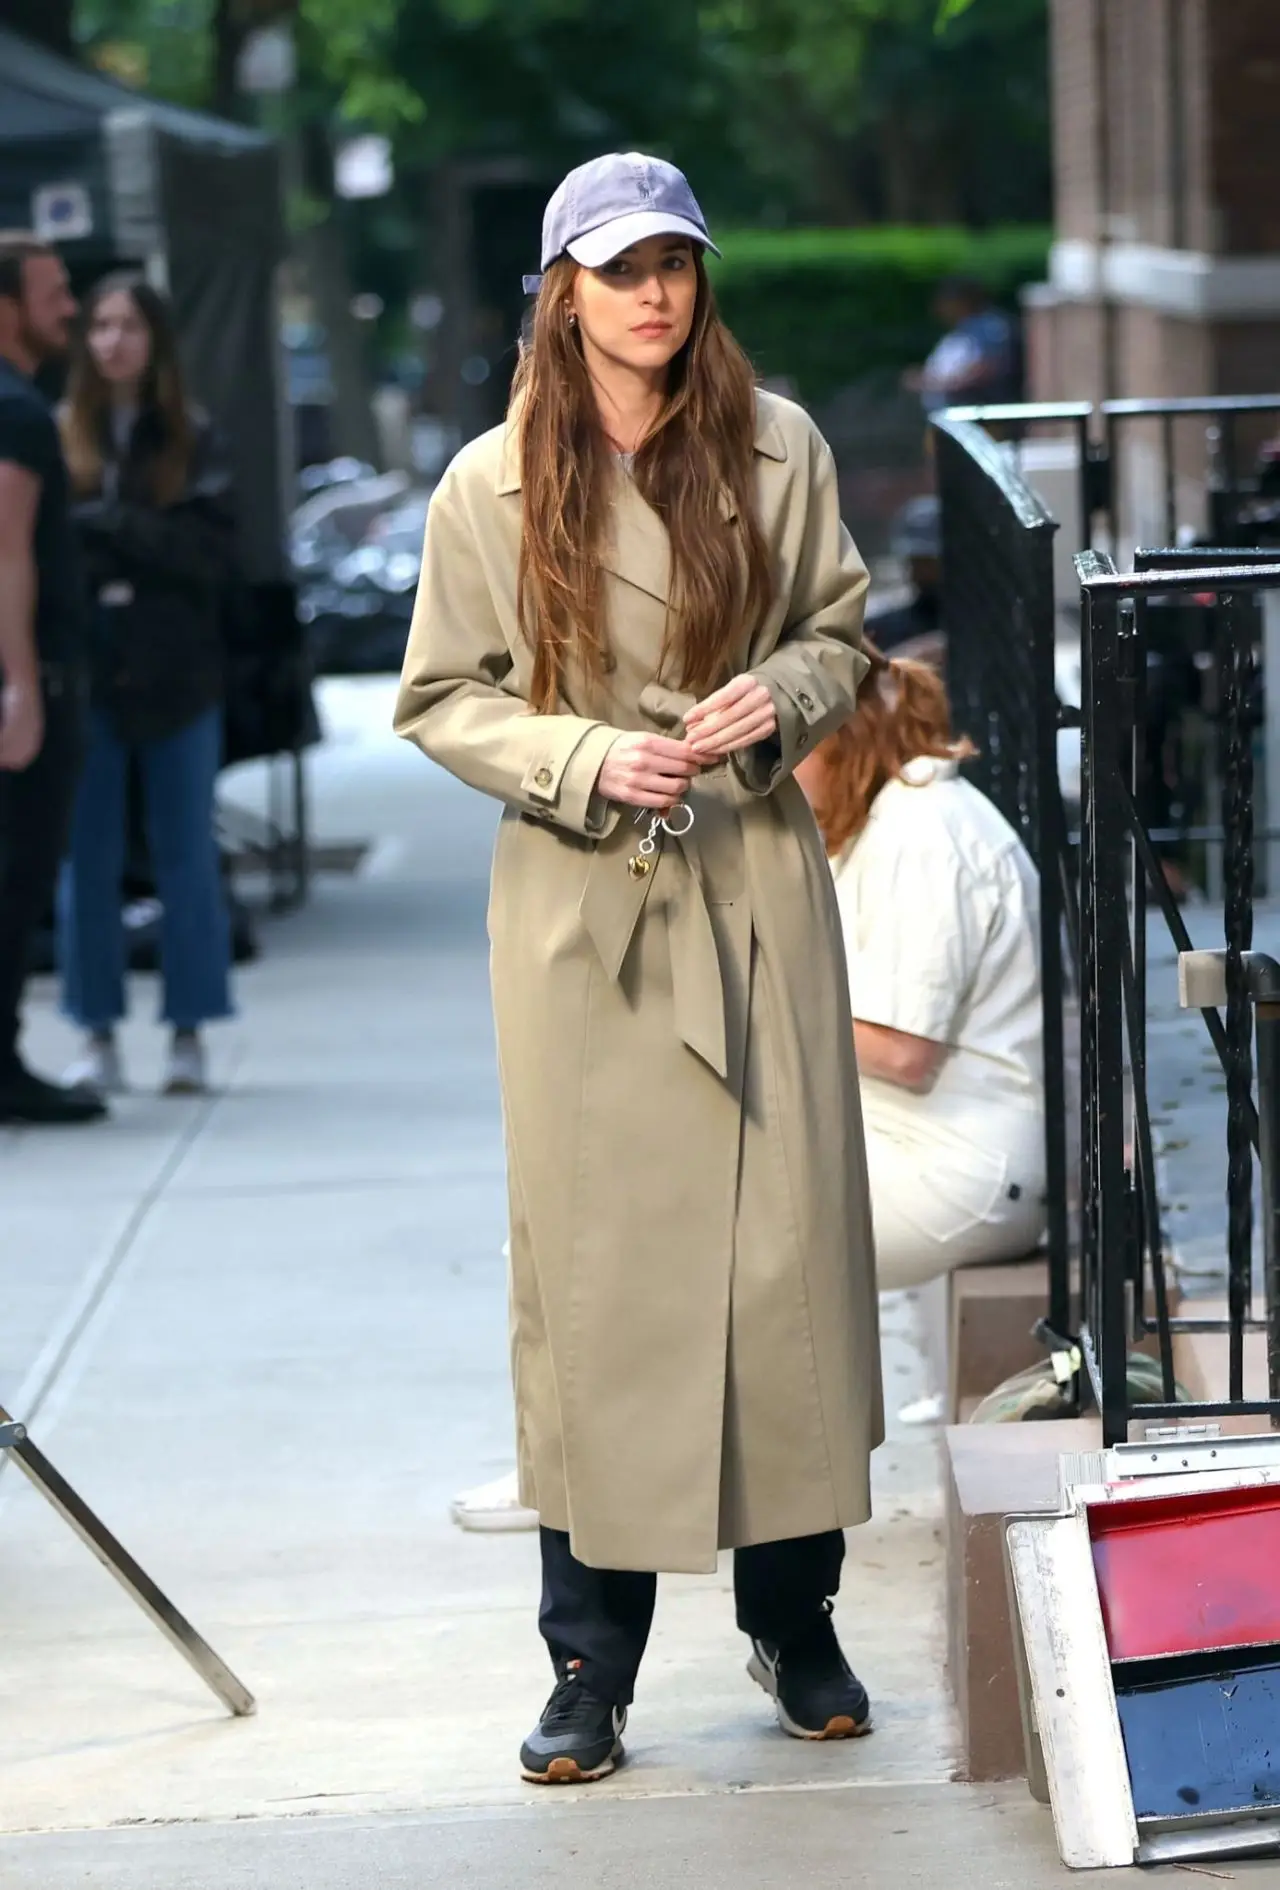 DAKOTA JOHNSON AT THE MOVIE SET OF THE MATERIALISTS IN NEW YORK06